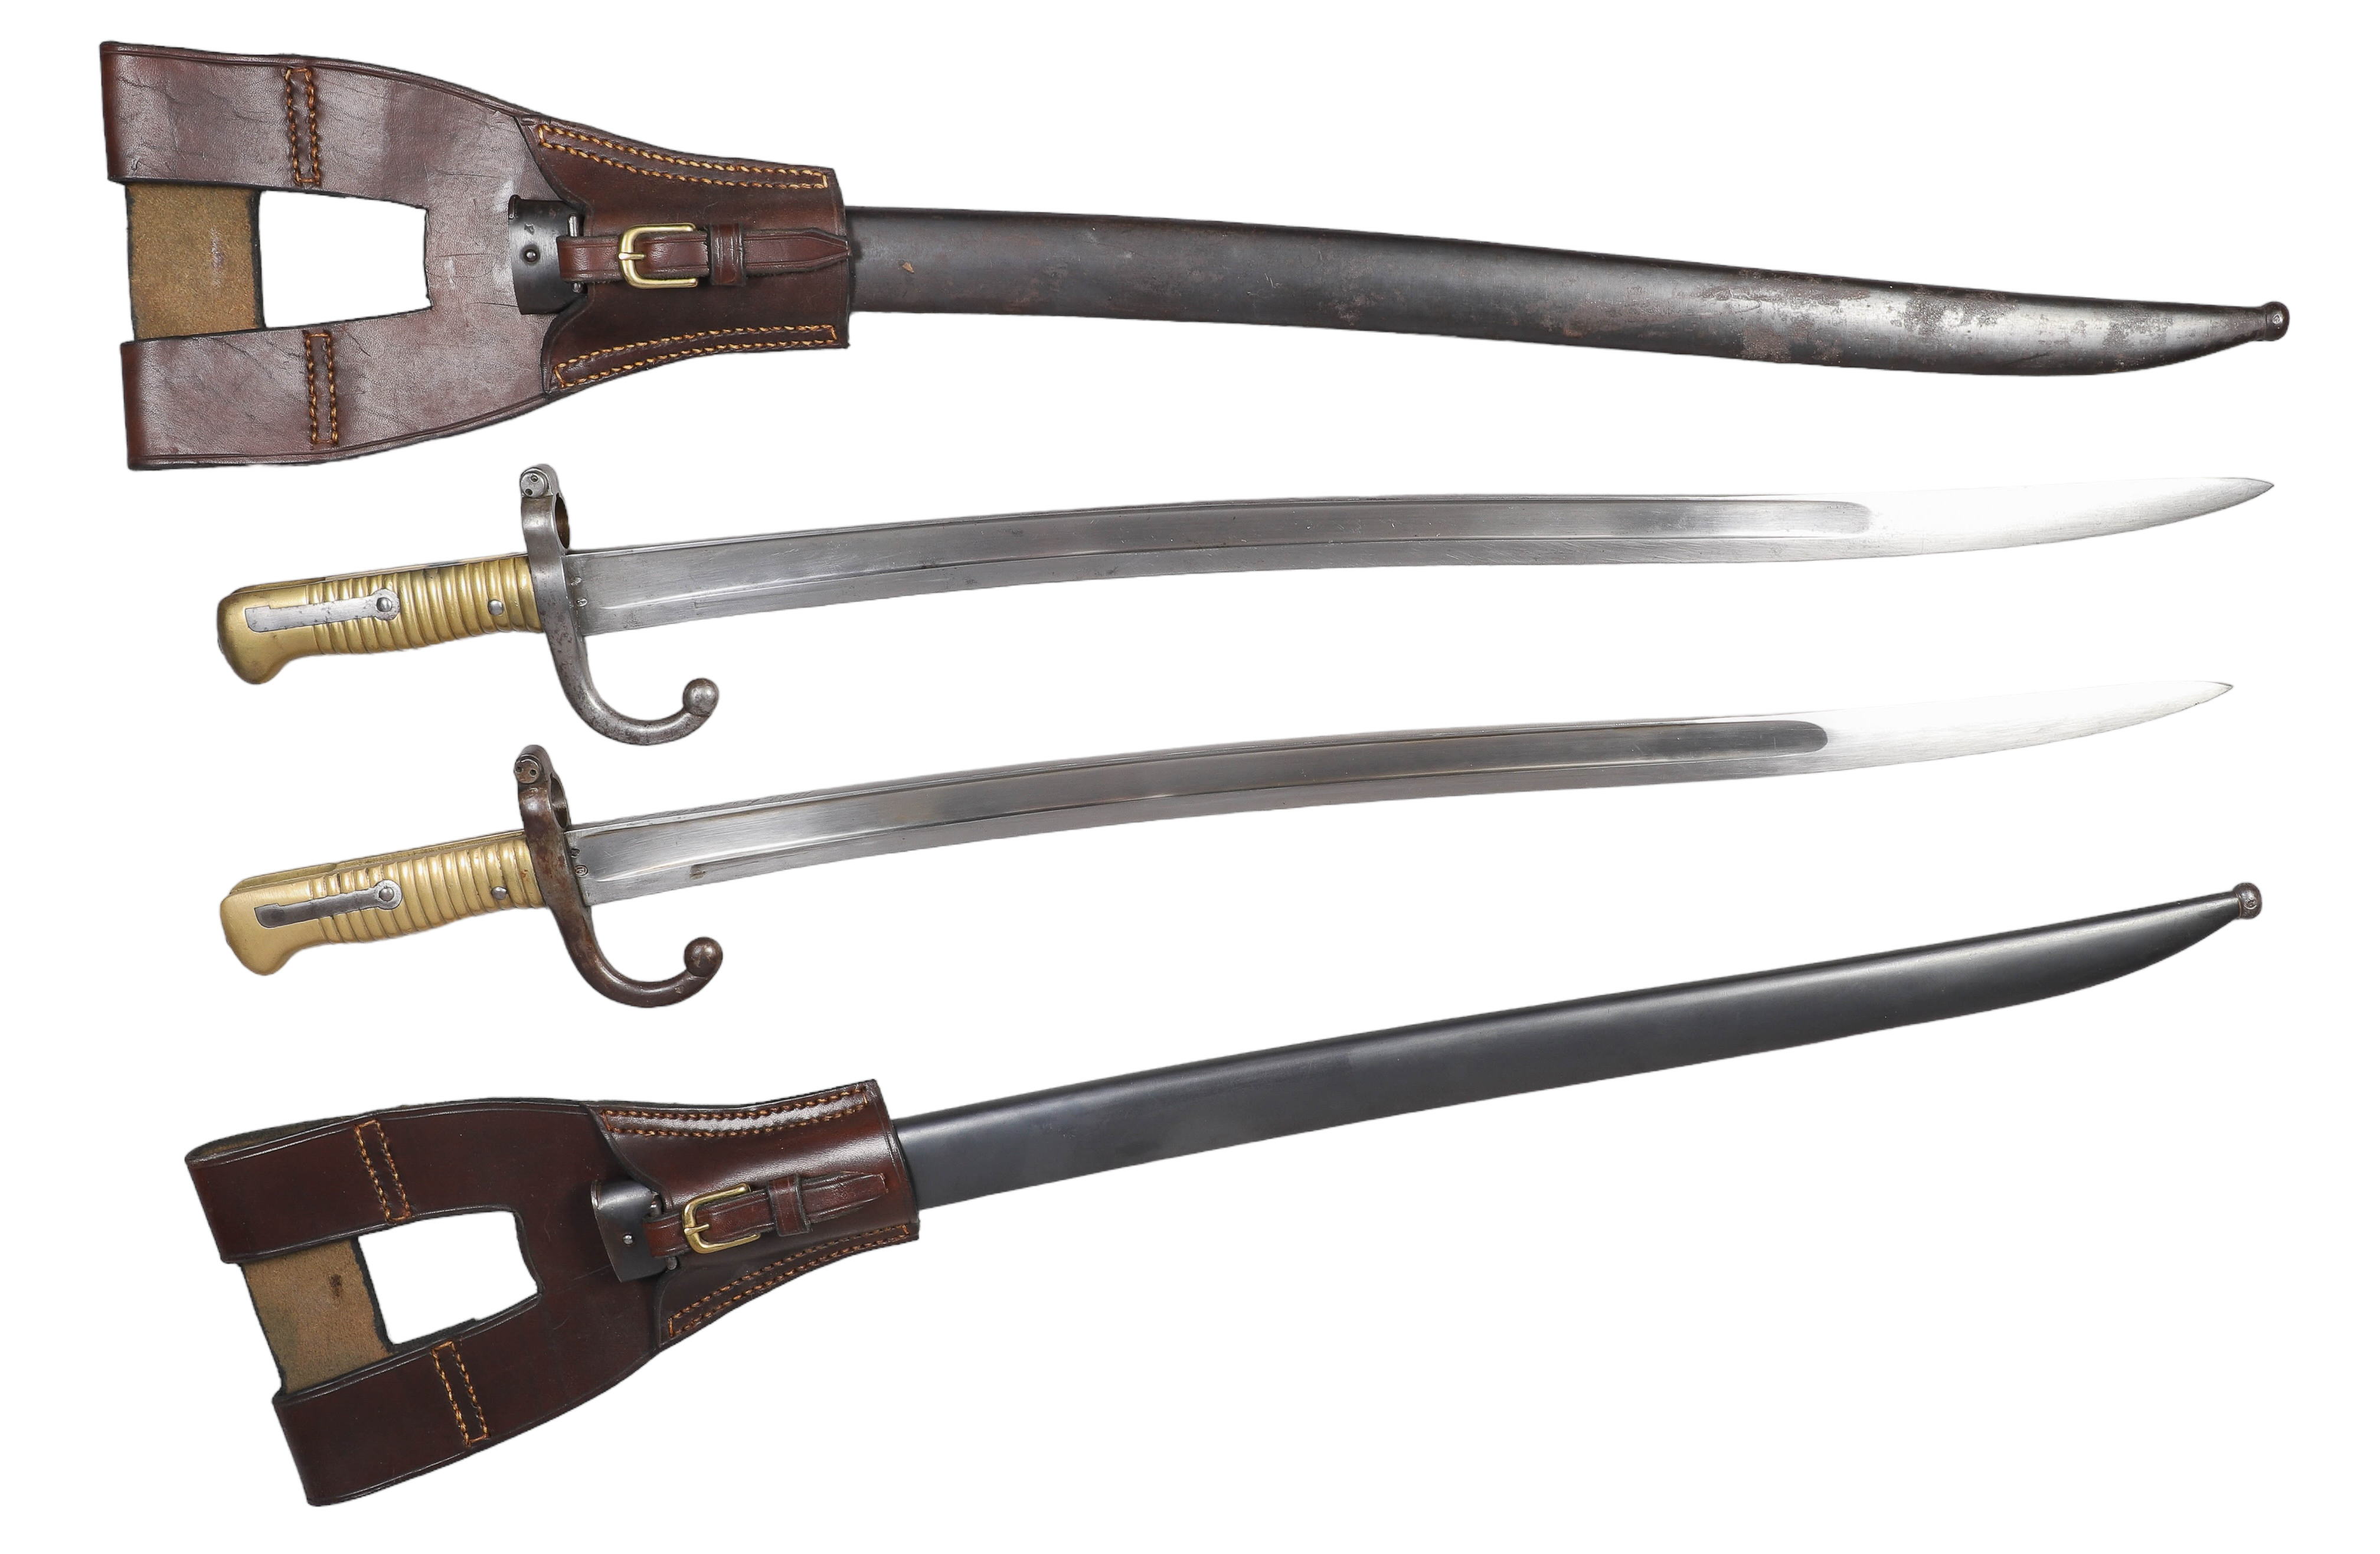  2 French Bayonets each with 2e1cd8